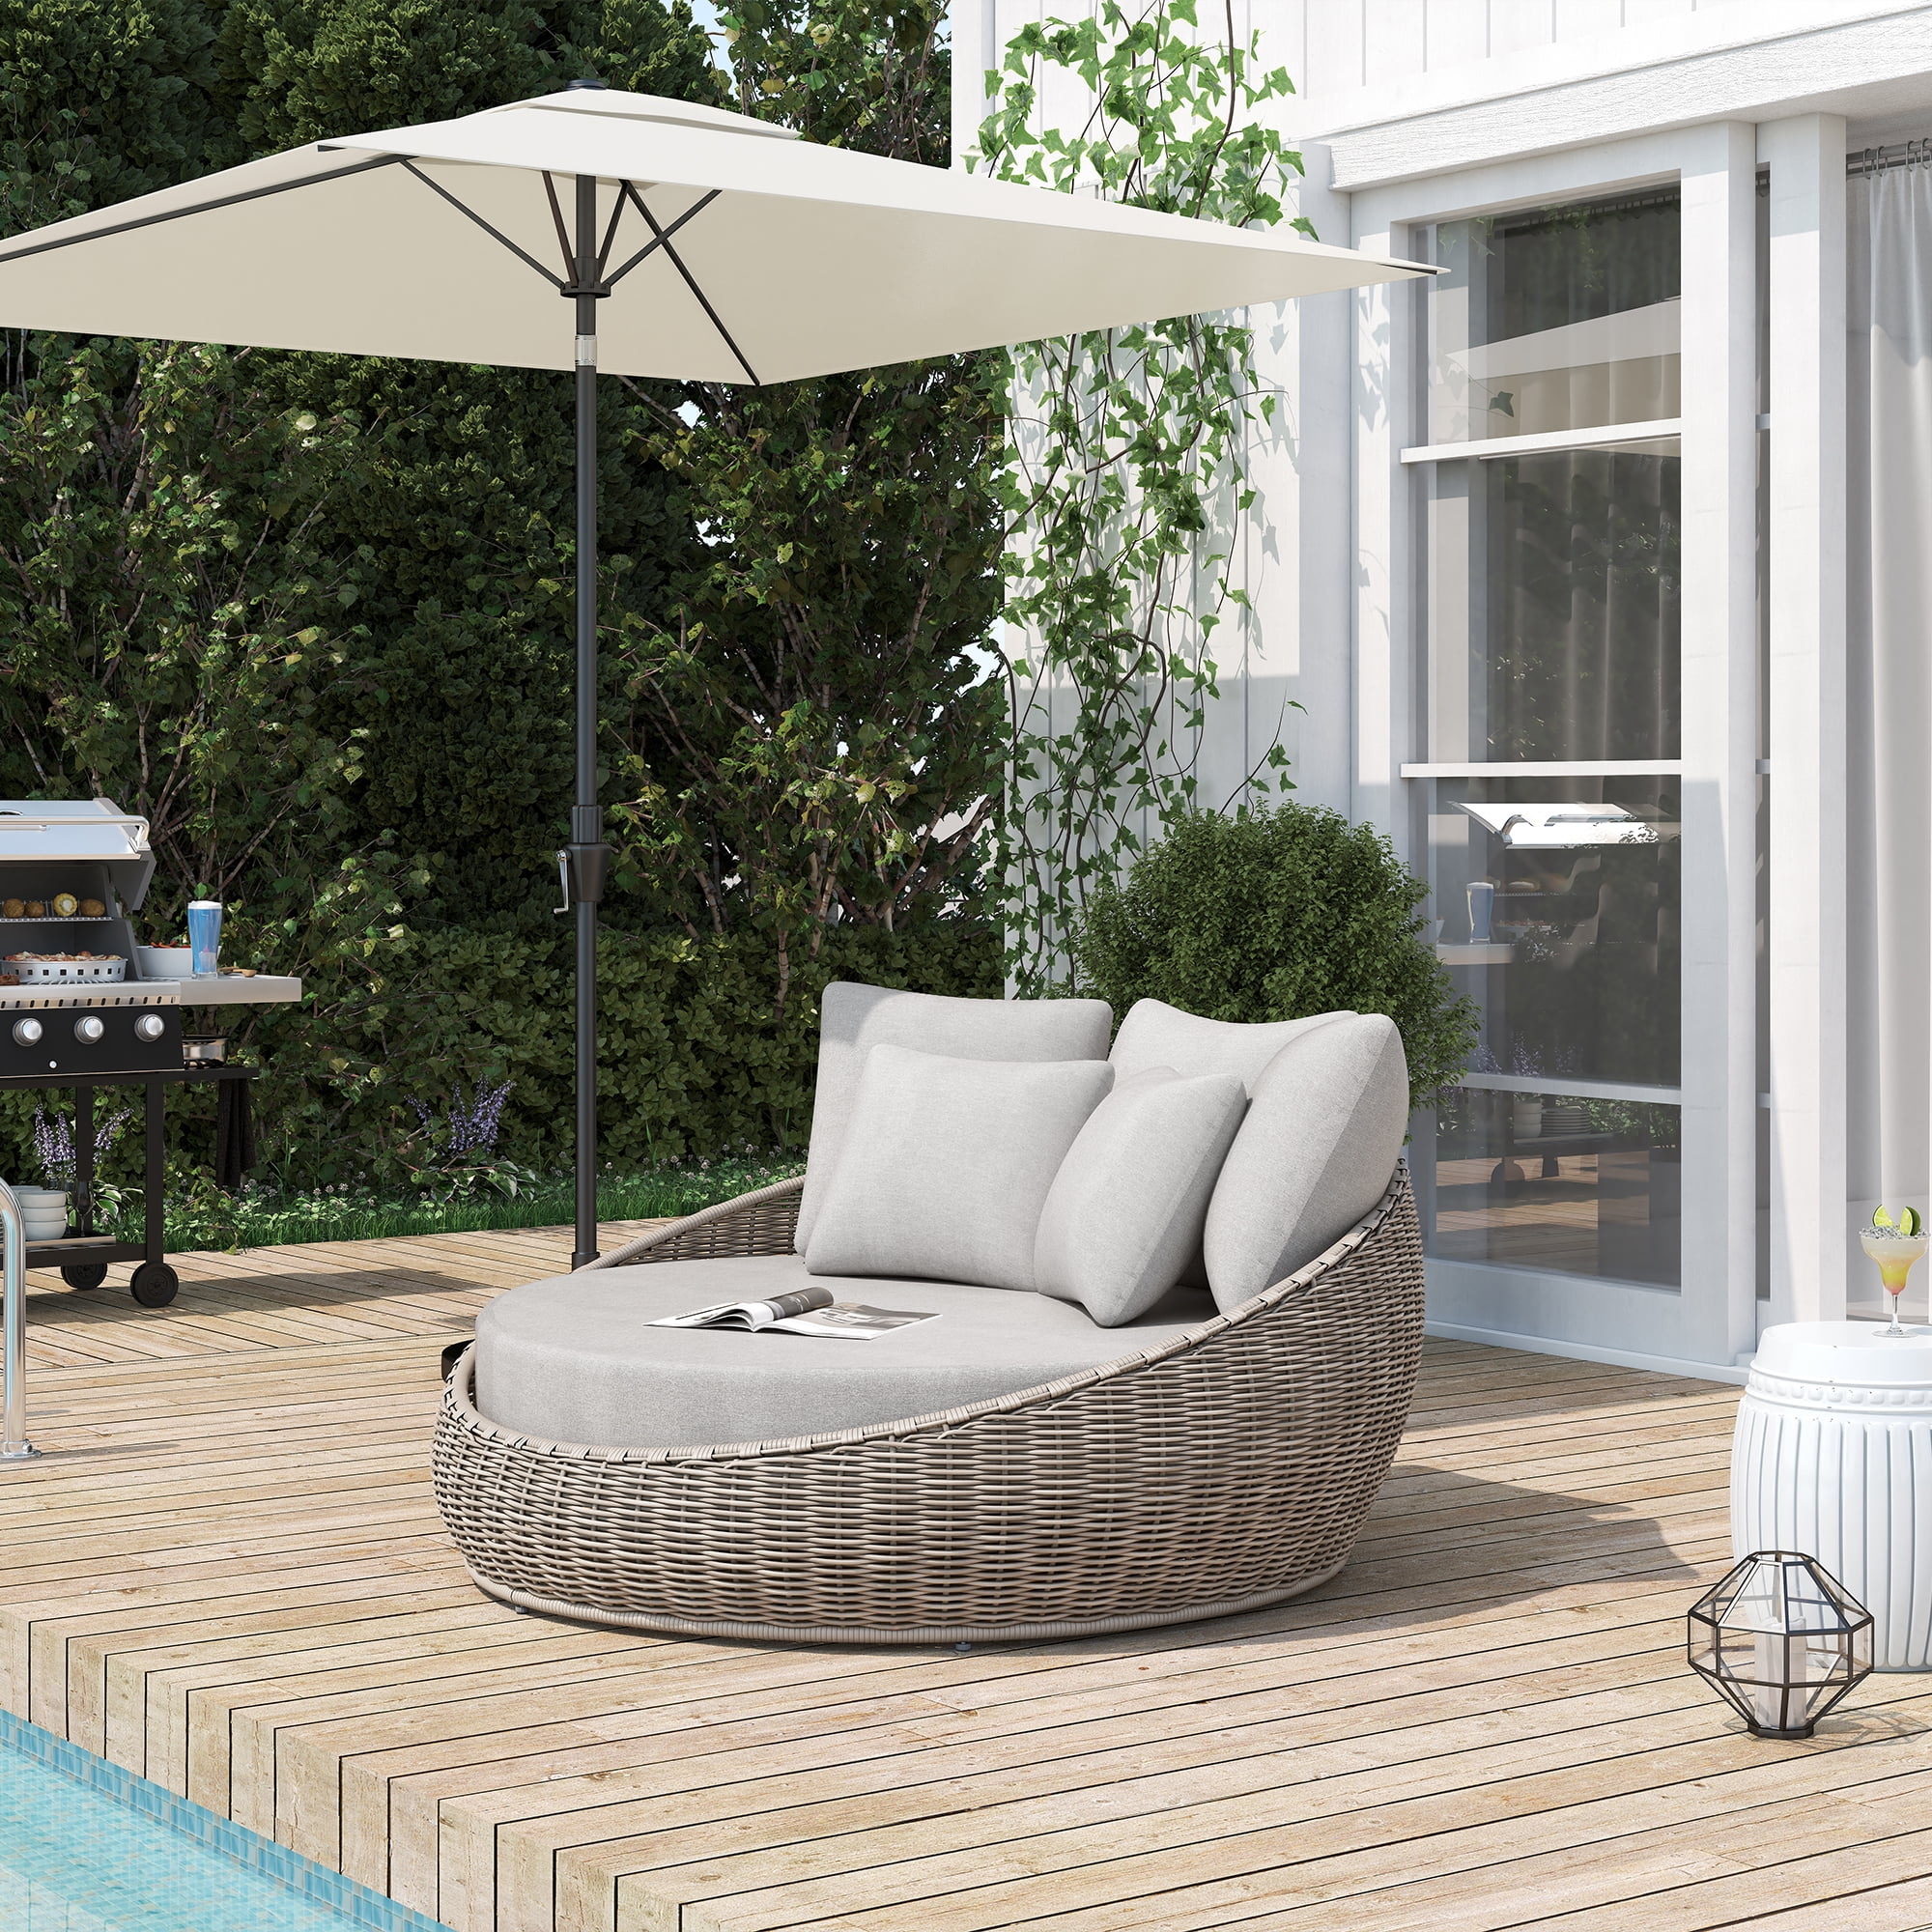 Garden Outdoor Rattan Daybed 2-in-1 Round Sofa Lounge Furniture Set with Parasol 